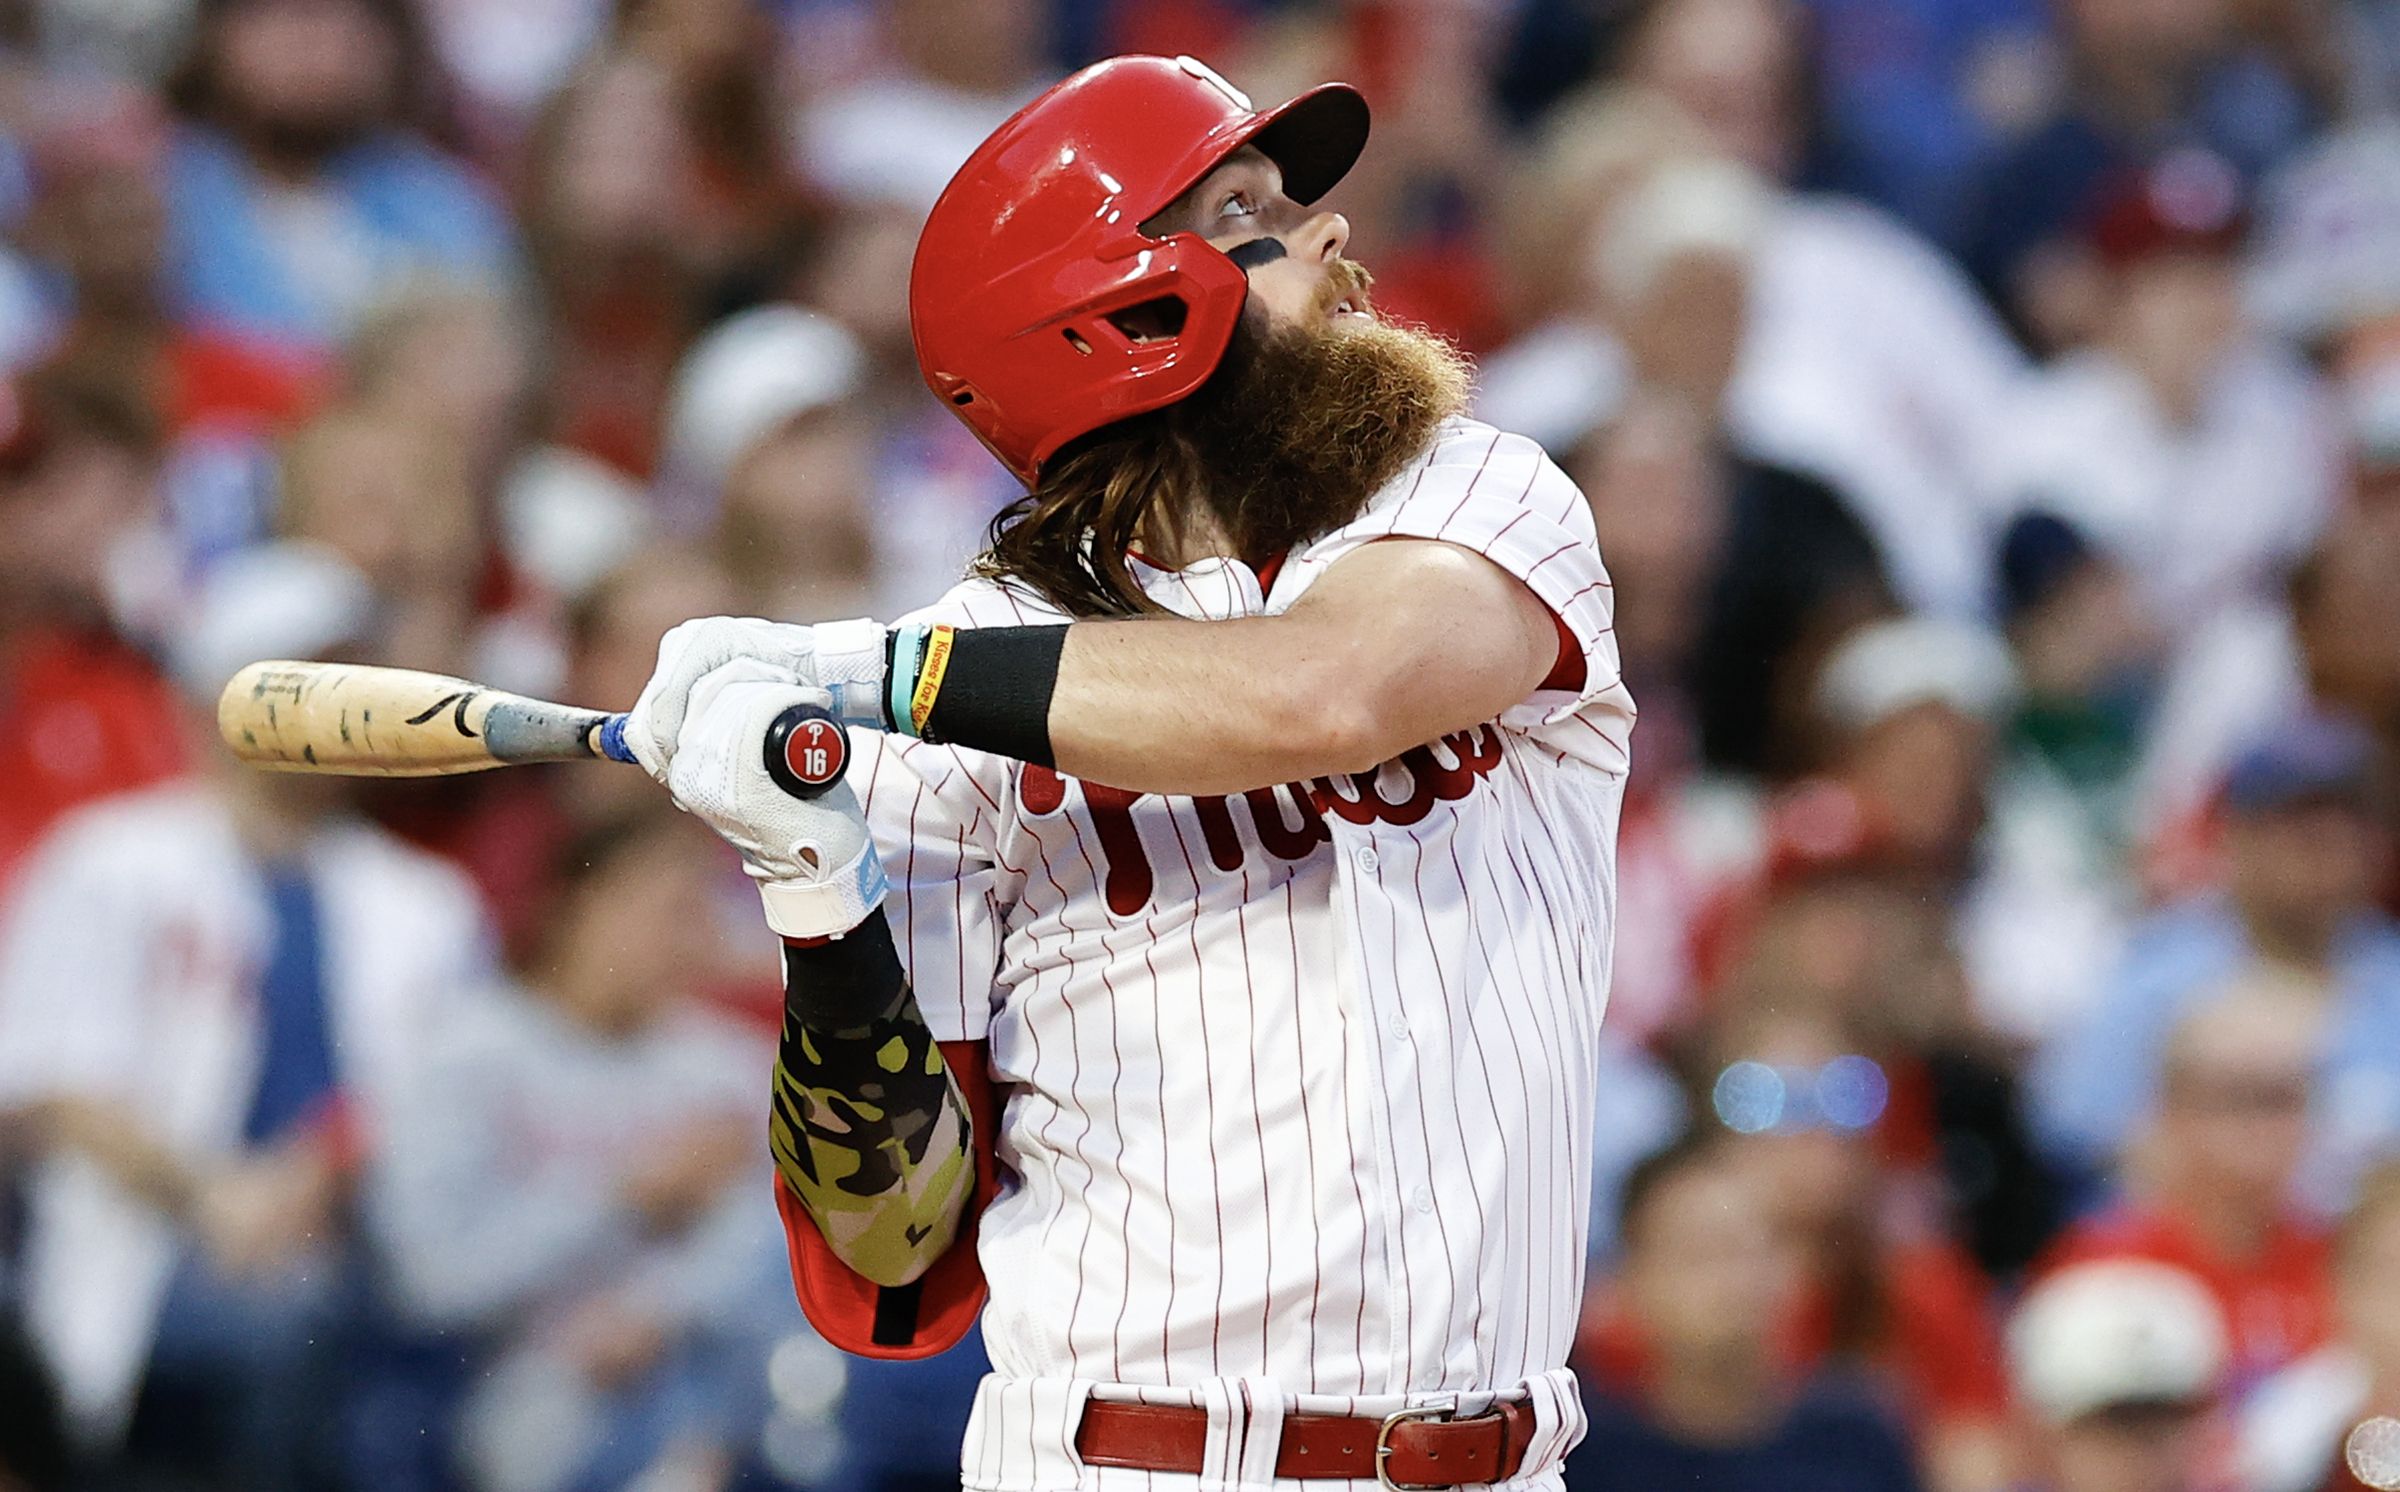 Angels trade LF Brandon Marsh to Phillies, per reports - DraftKings Network